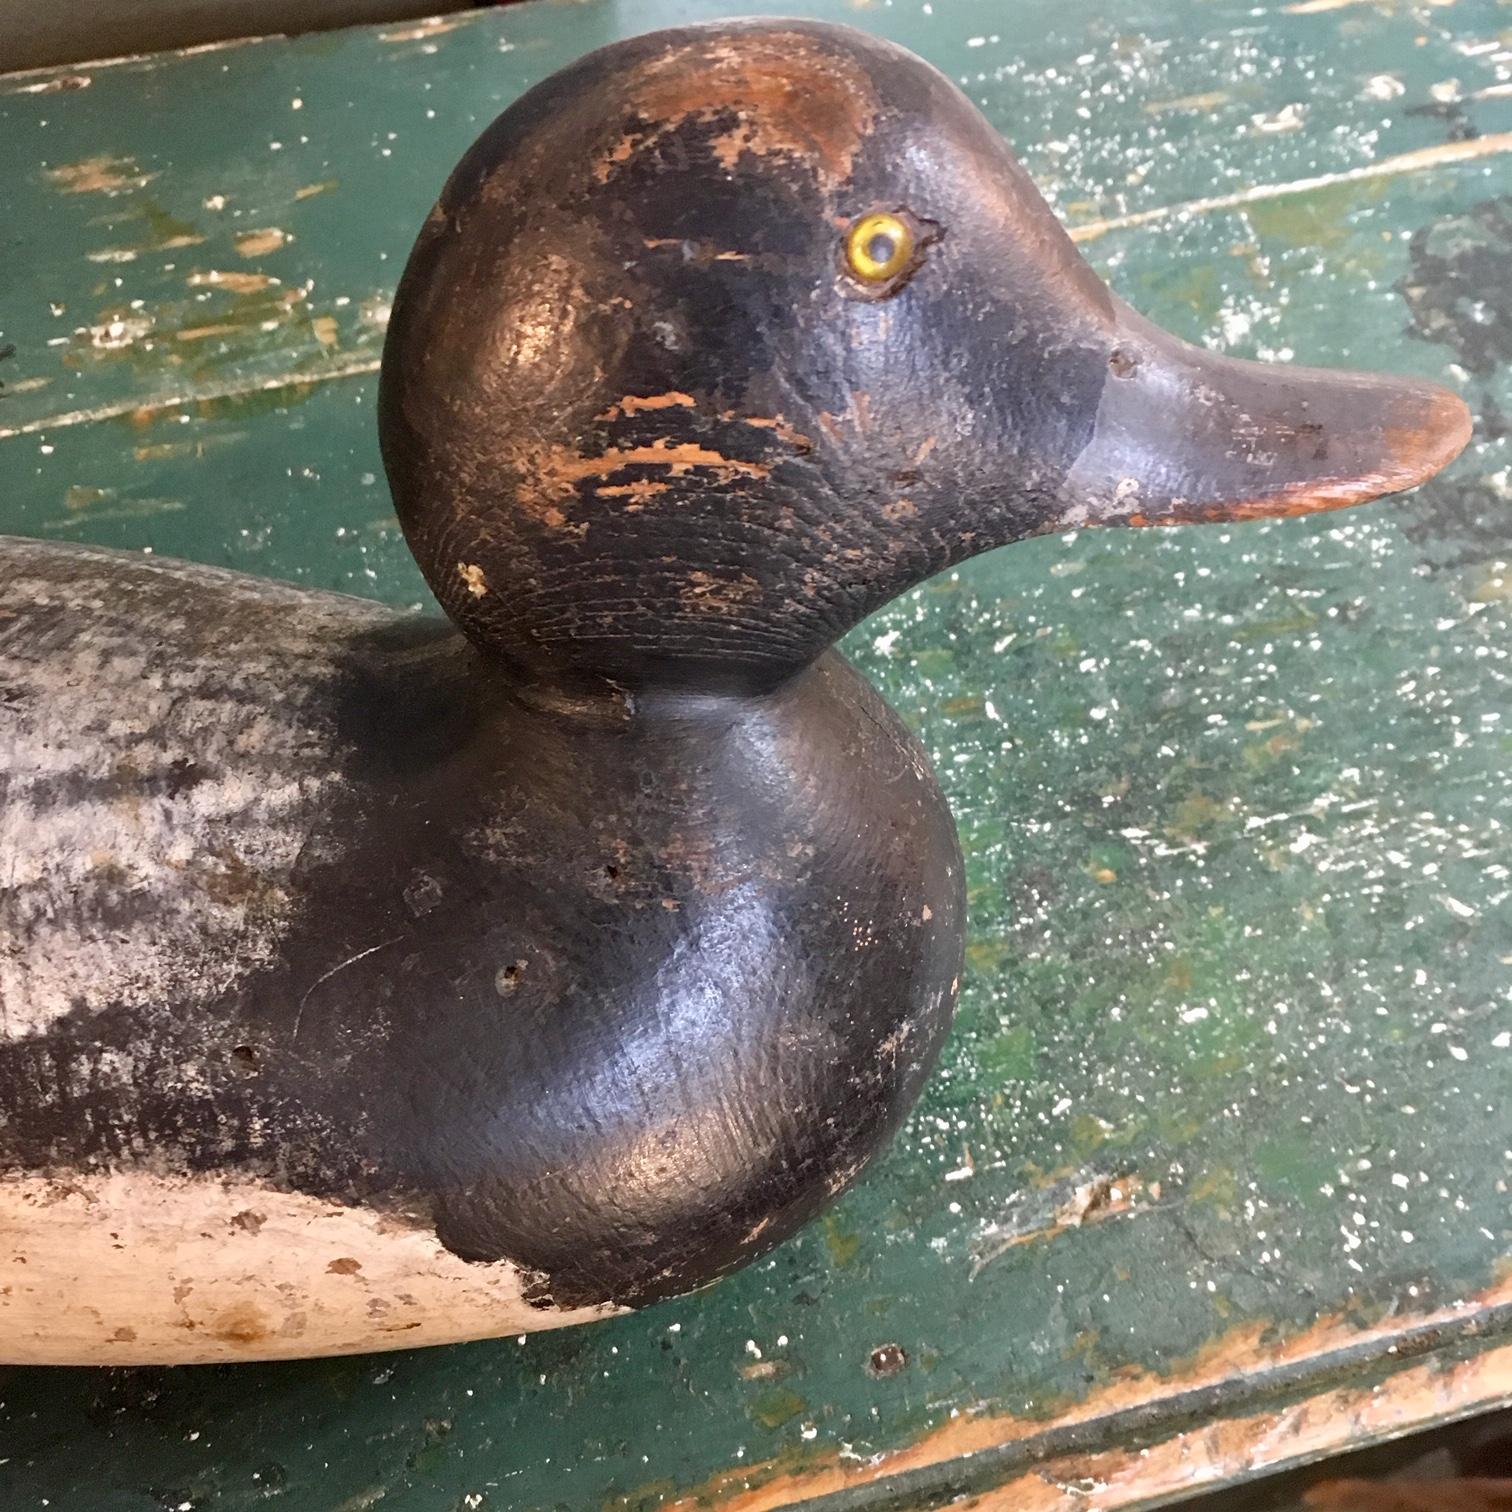 Mason glass eye bluebill Drake decoy, circa 1920. The decoy retains most of it's original paint with just some touch-up. Mason decoys were extremely popular and sought after in the Detroit area.

Dimensions 13.75